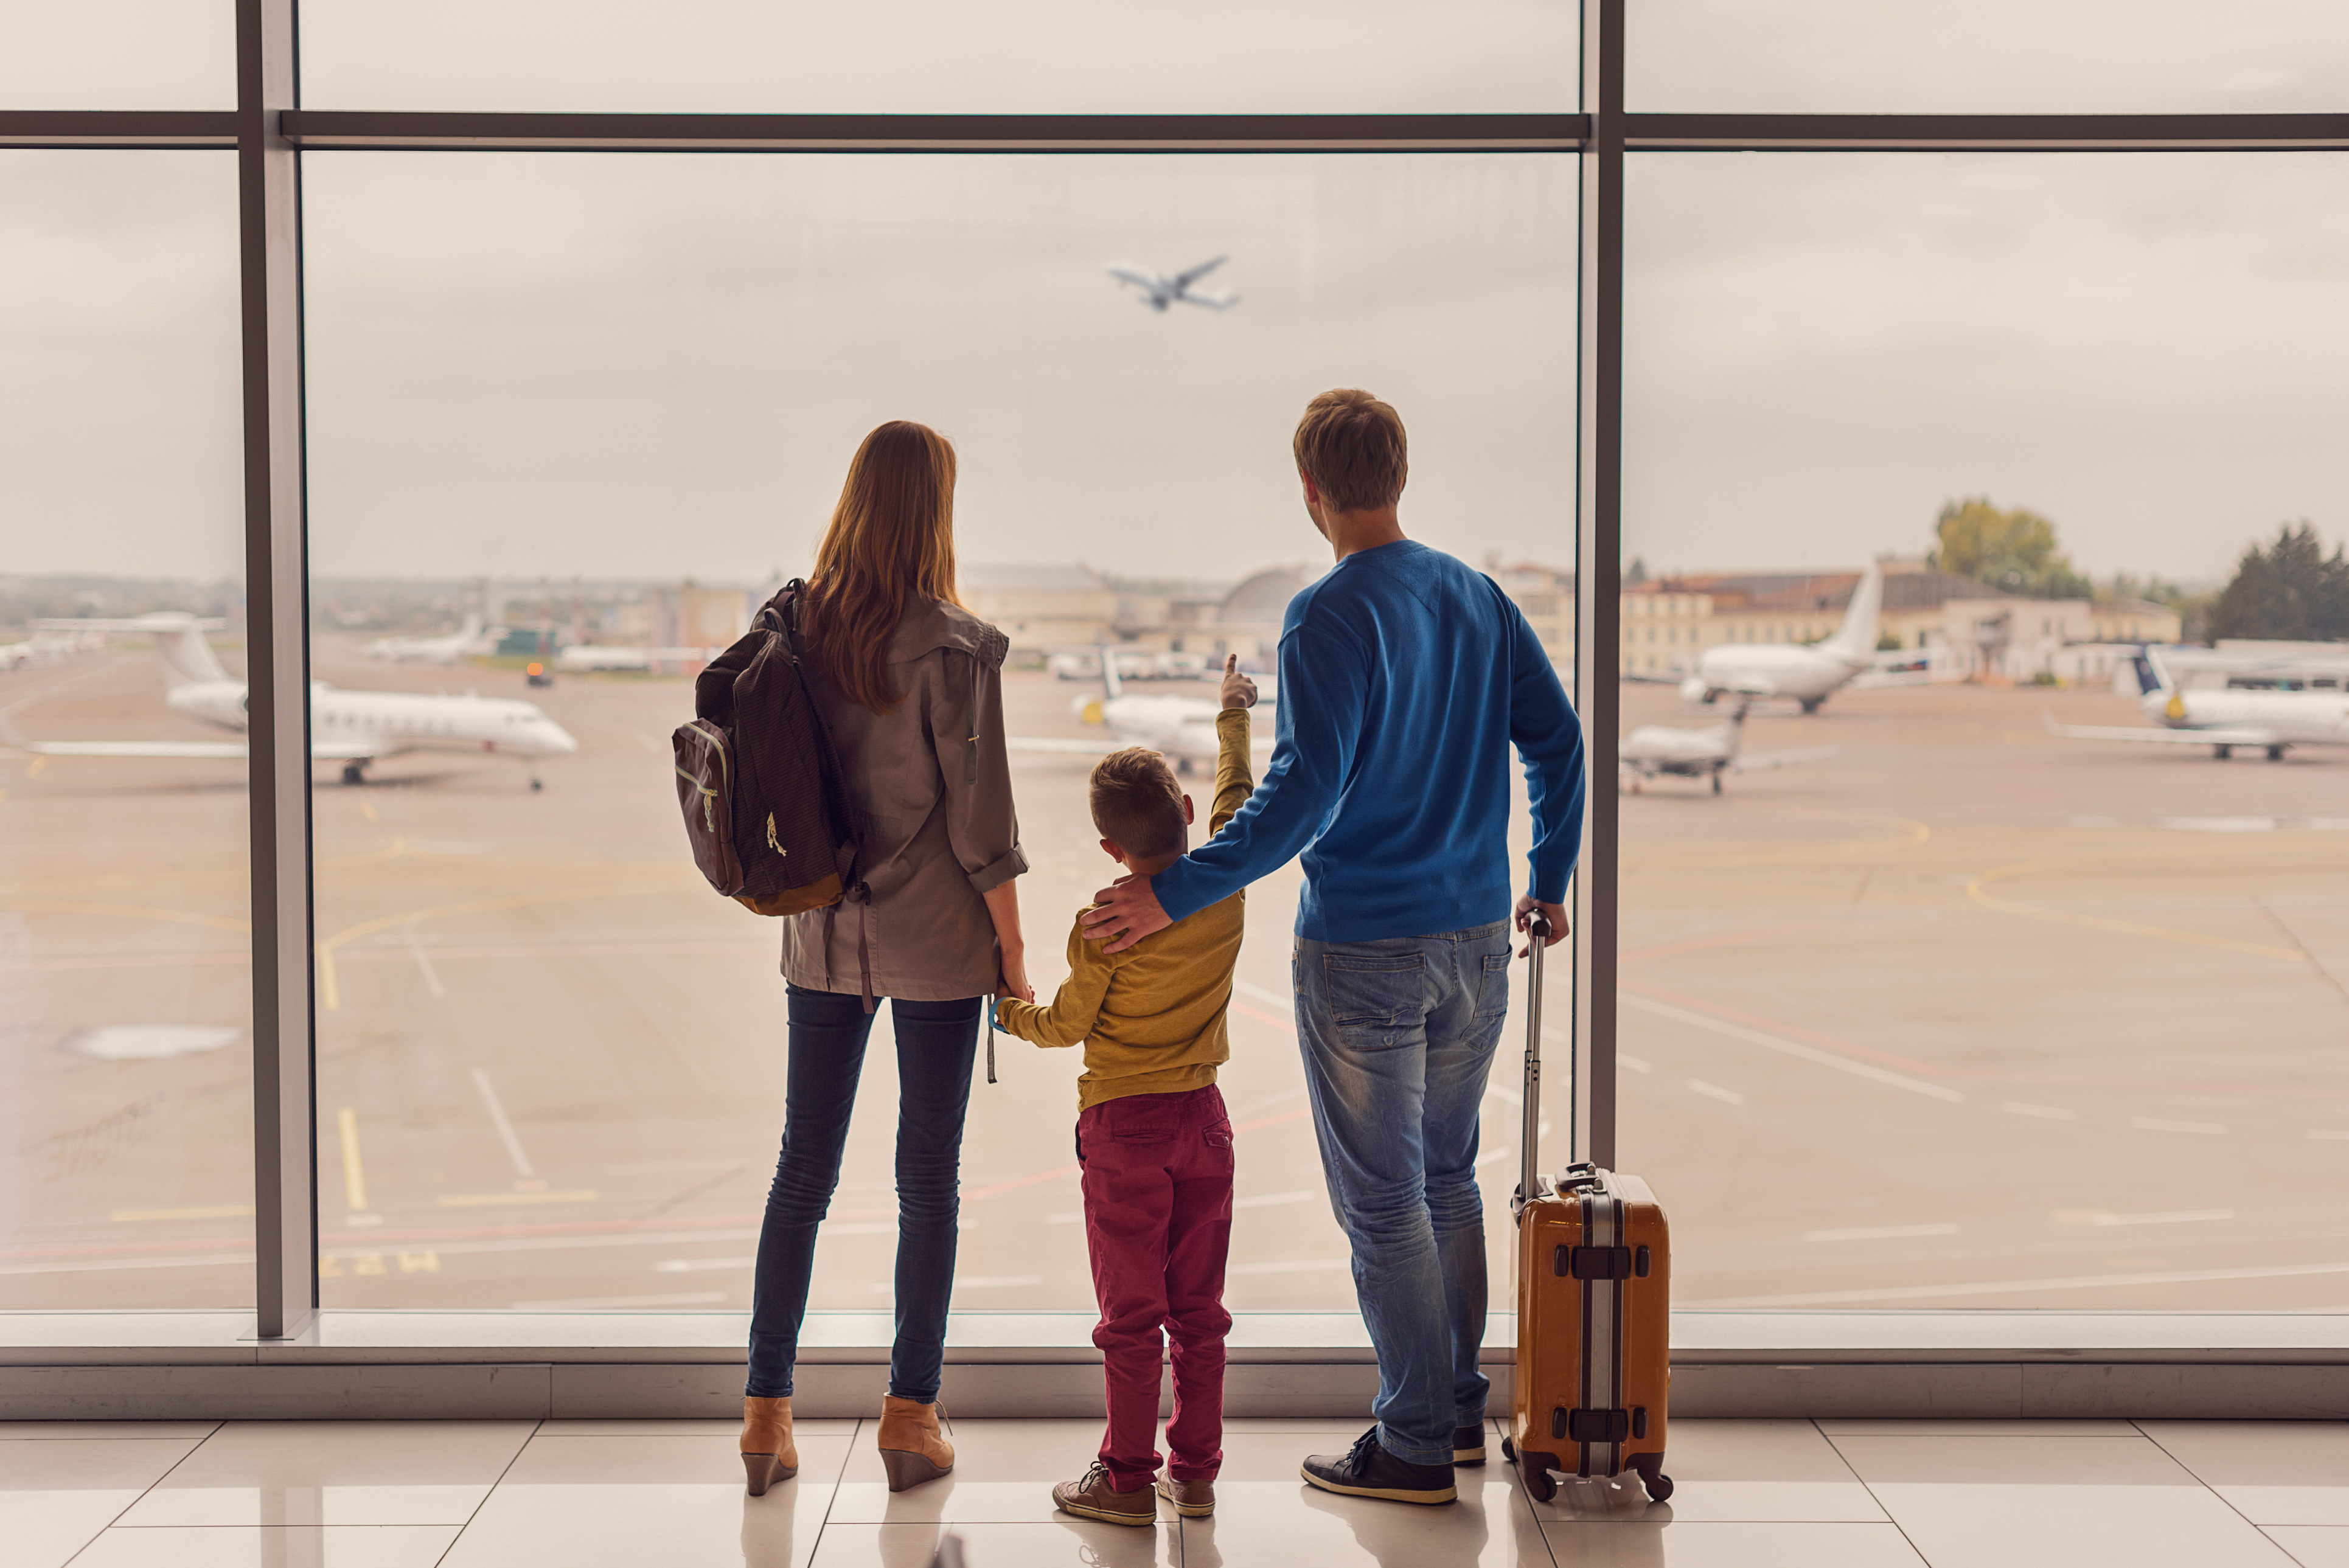 Family of three looking out the airport window at an airplane